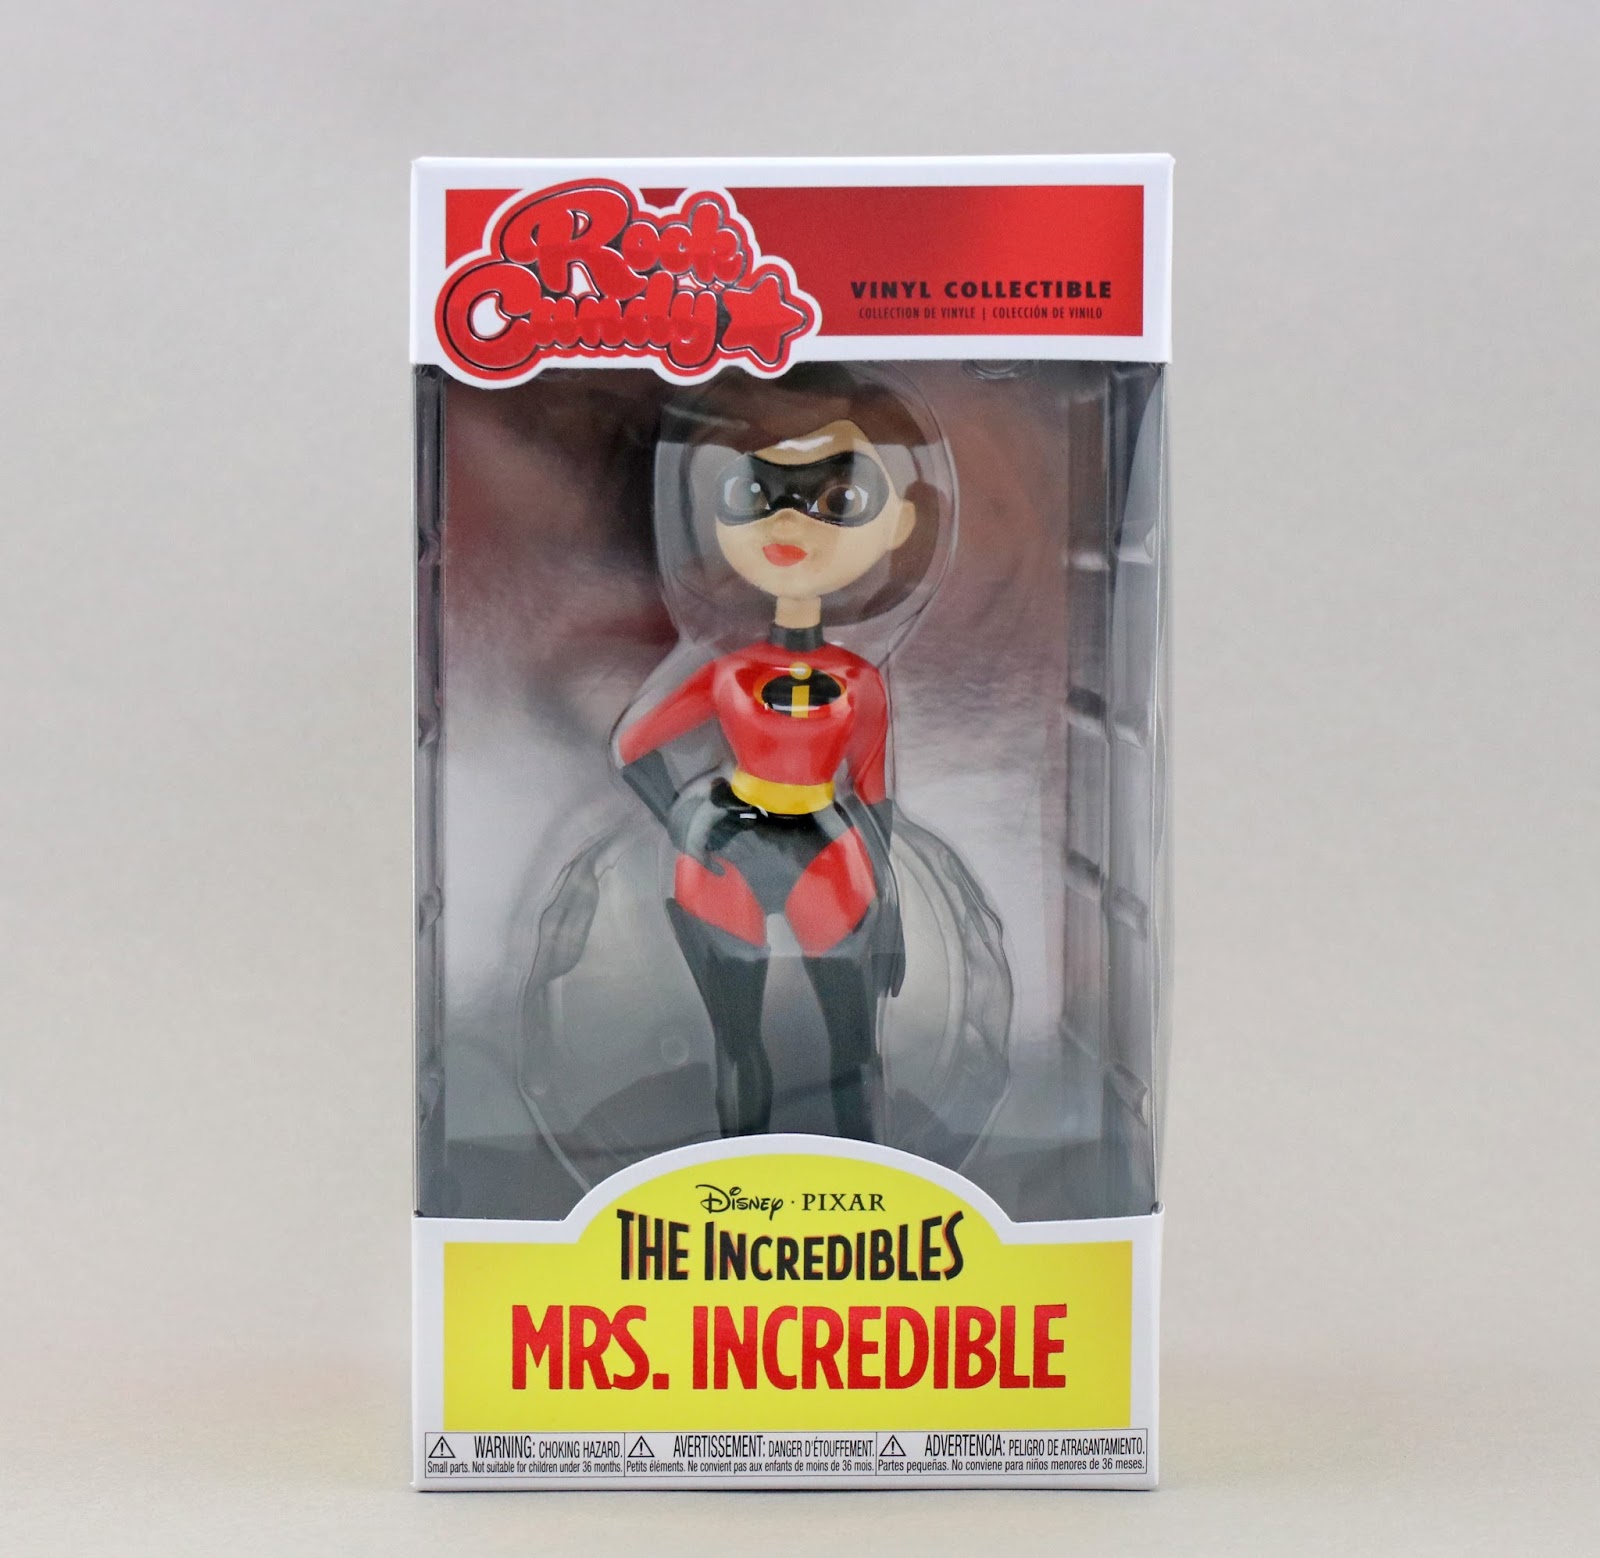  Mrs. Incredible Rock Candy Vinyl Collectible by Funko